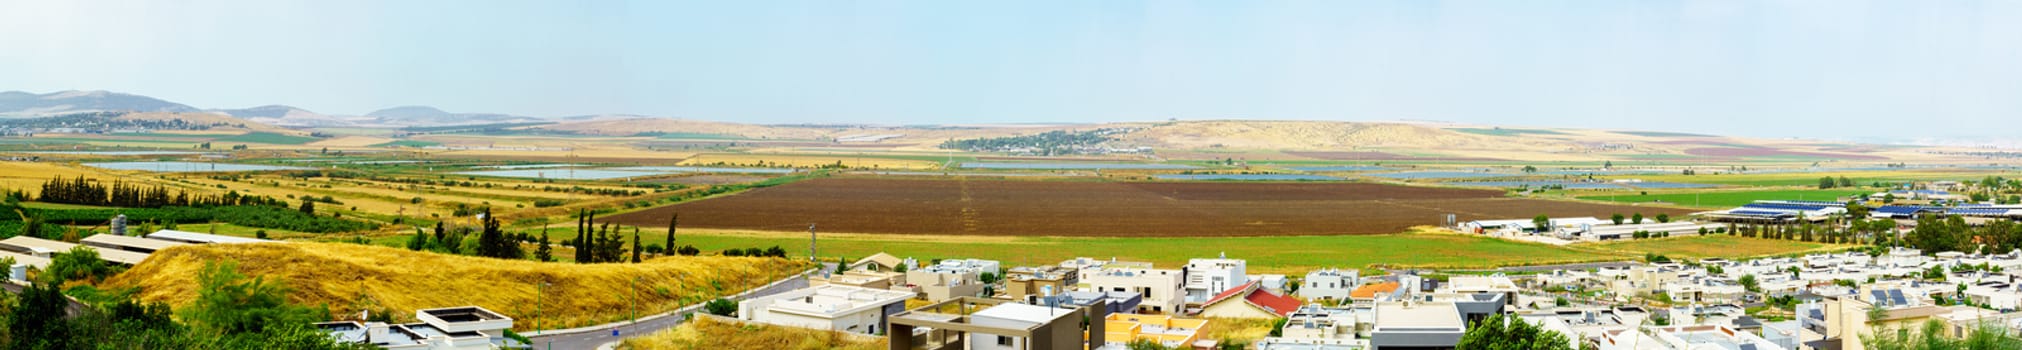 Panoramic view of Heftziba, and countryside of Jezreel and Beit Shean Valleys. Northern Israel